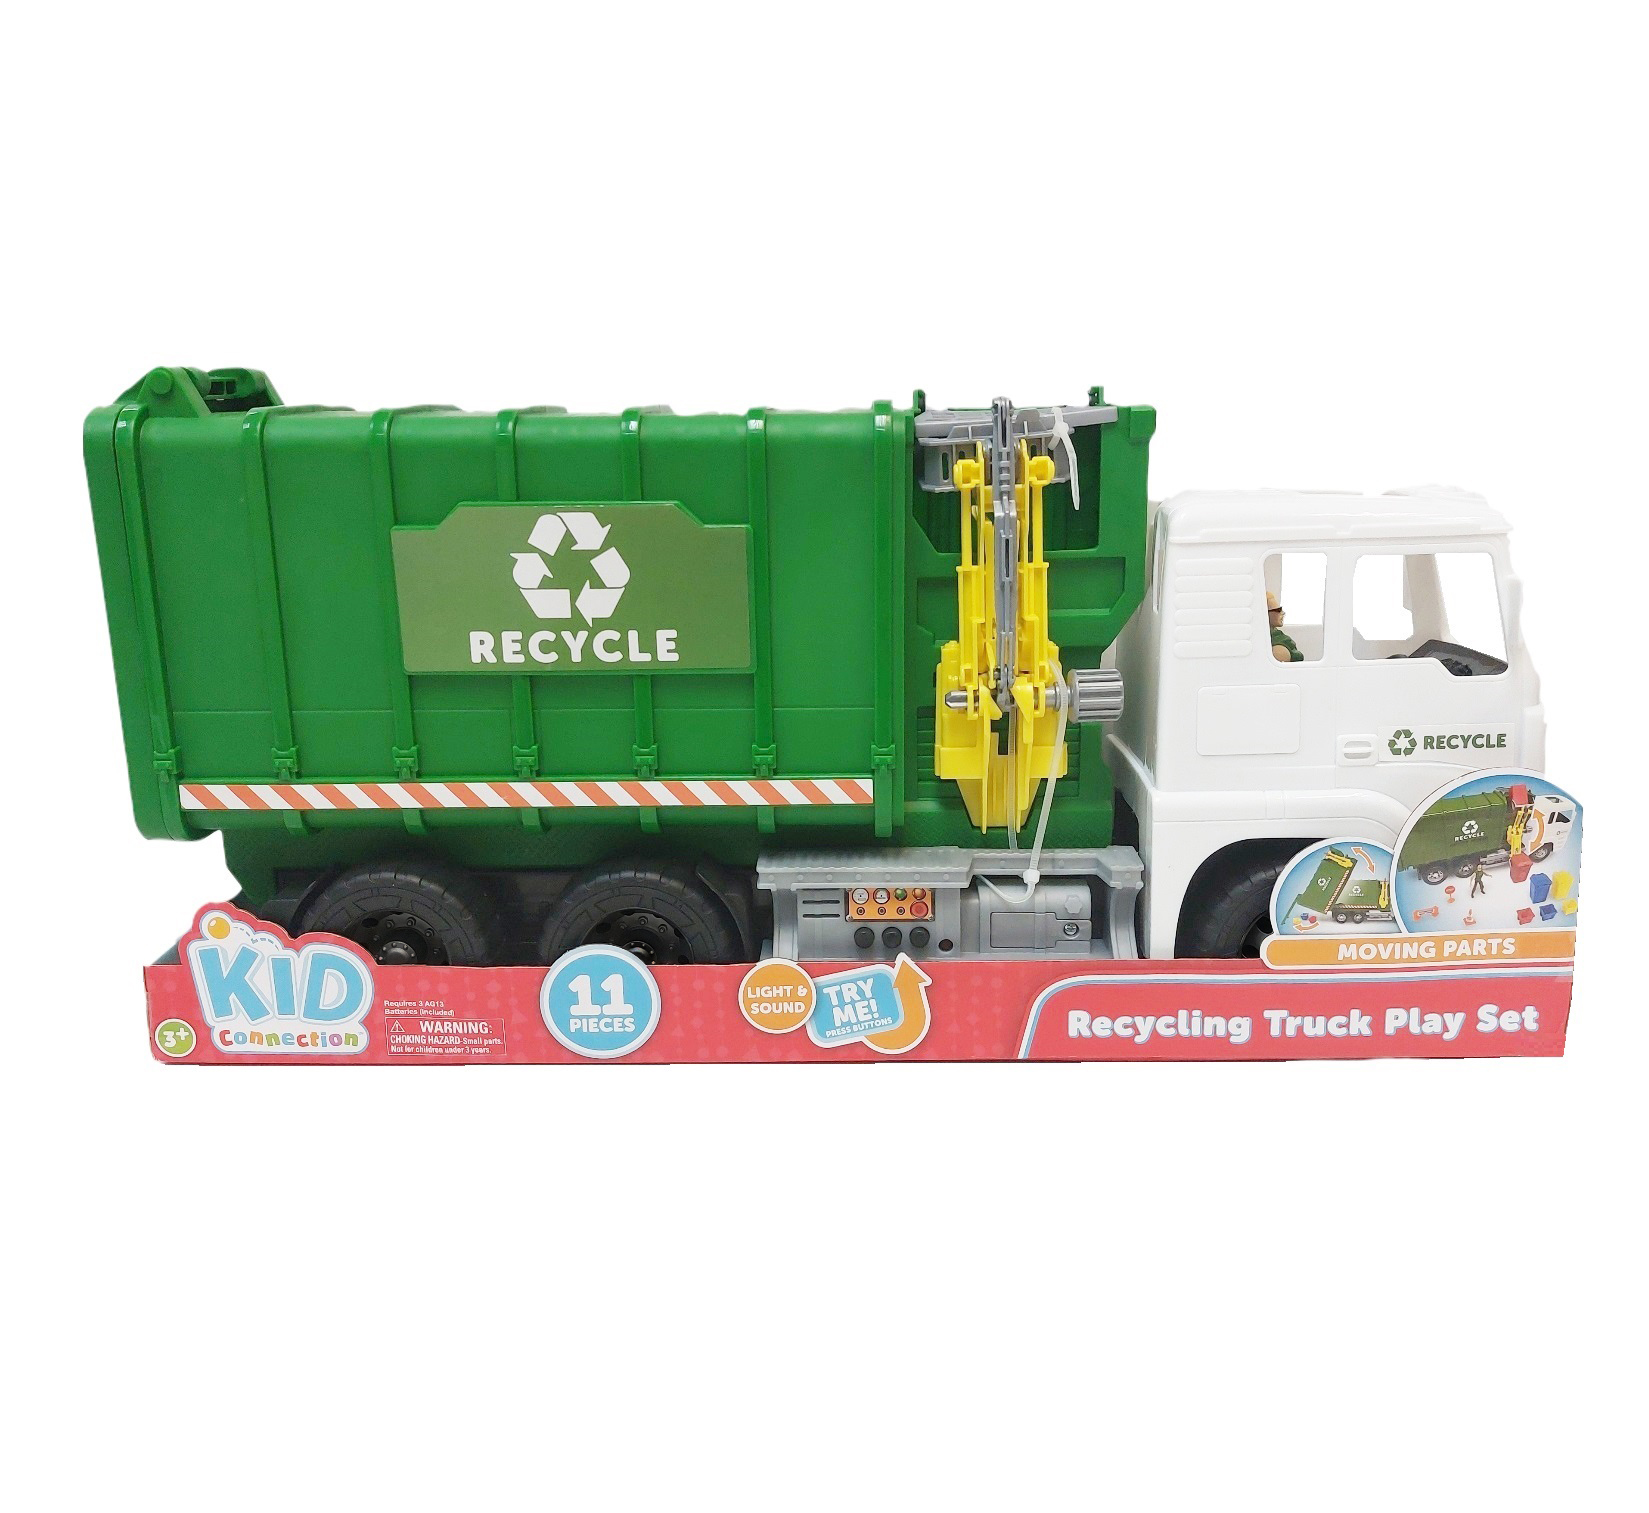 Kid Connection Recycling Truck Play Set, 11 Pieces - image 2 of 6